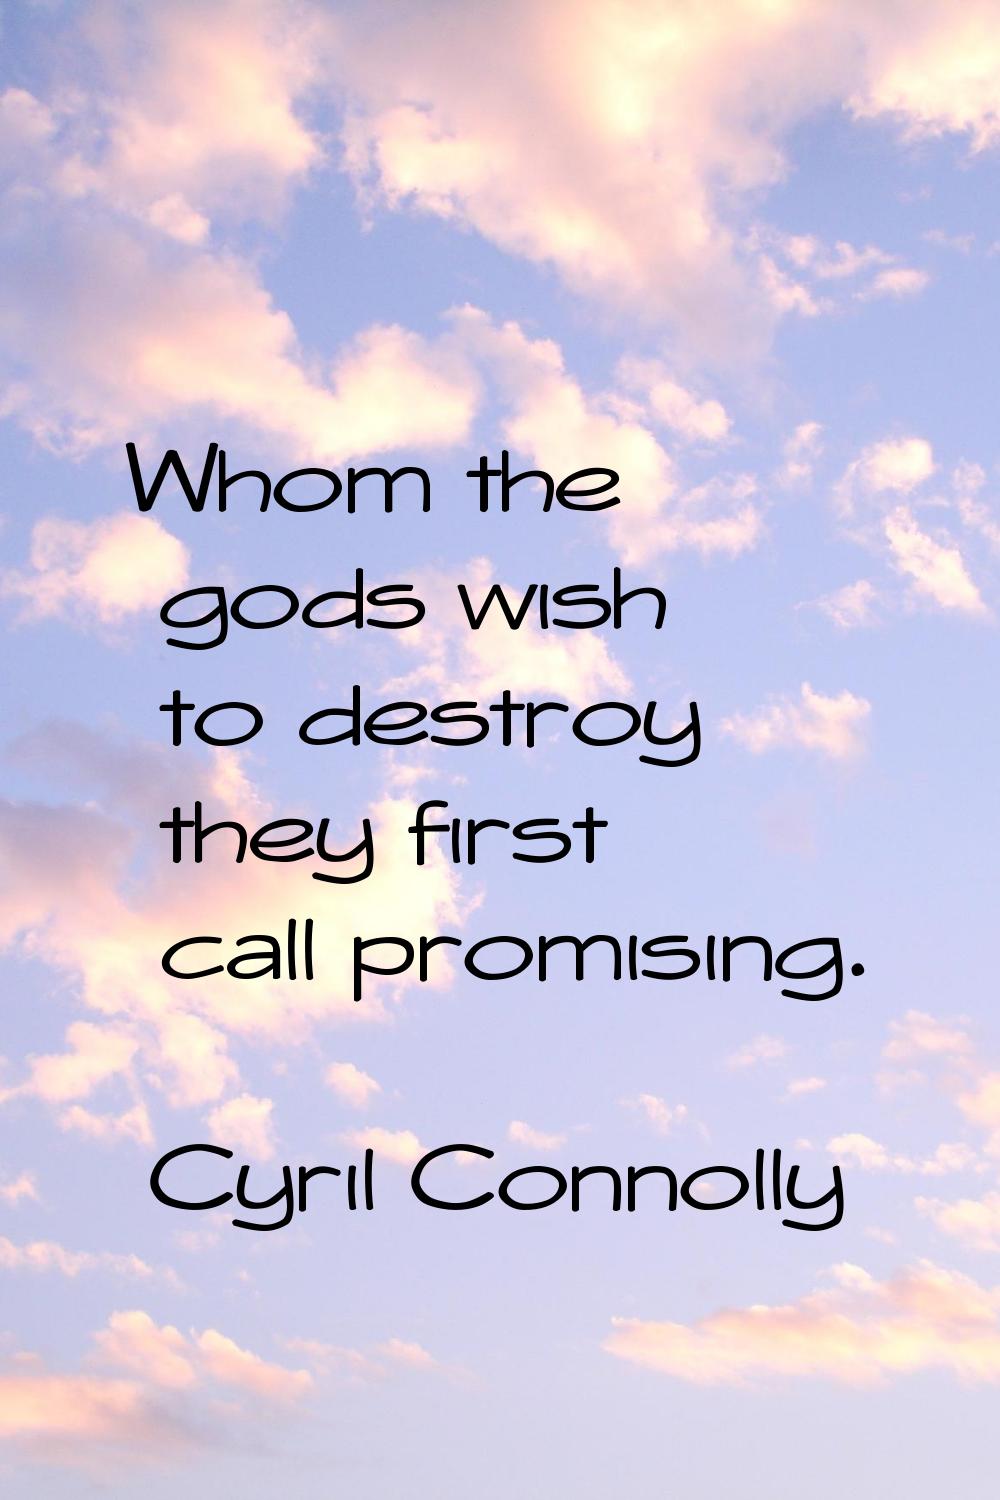 Whom the gods wish to destroy they first call promising.